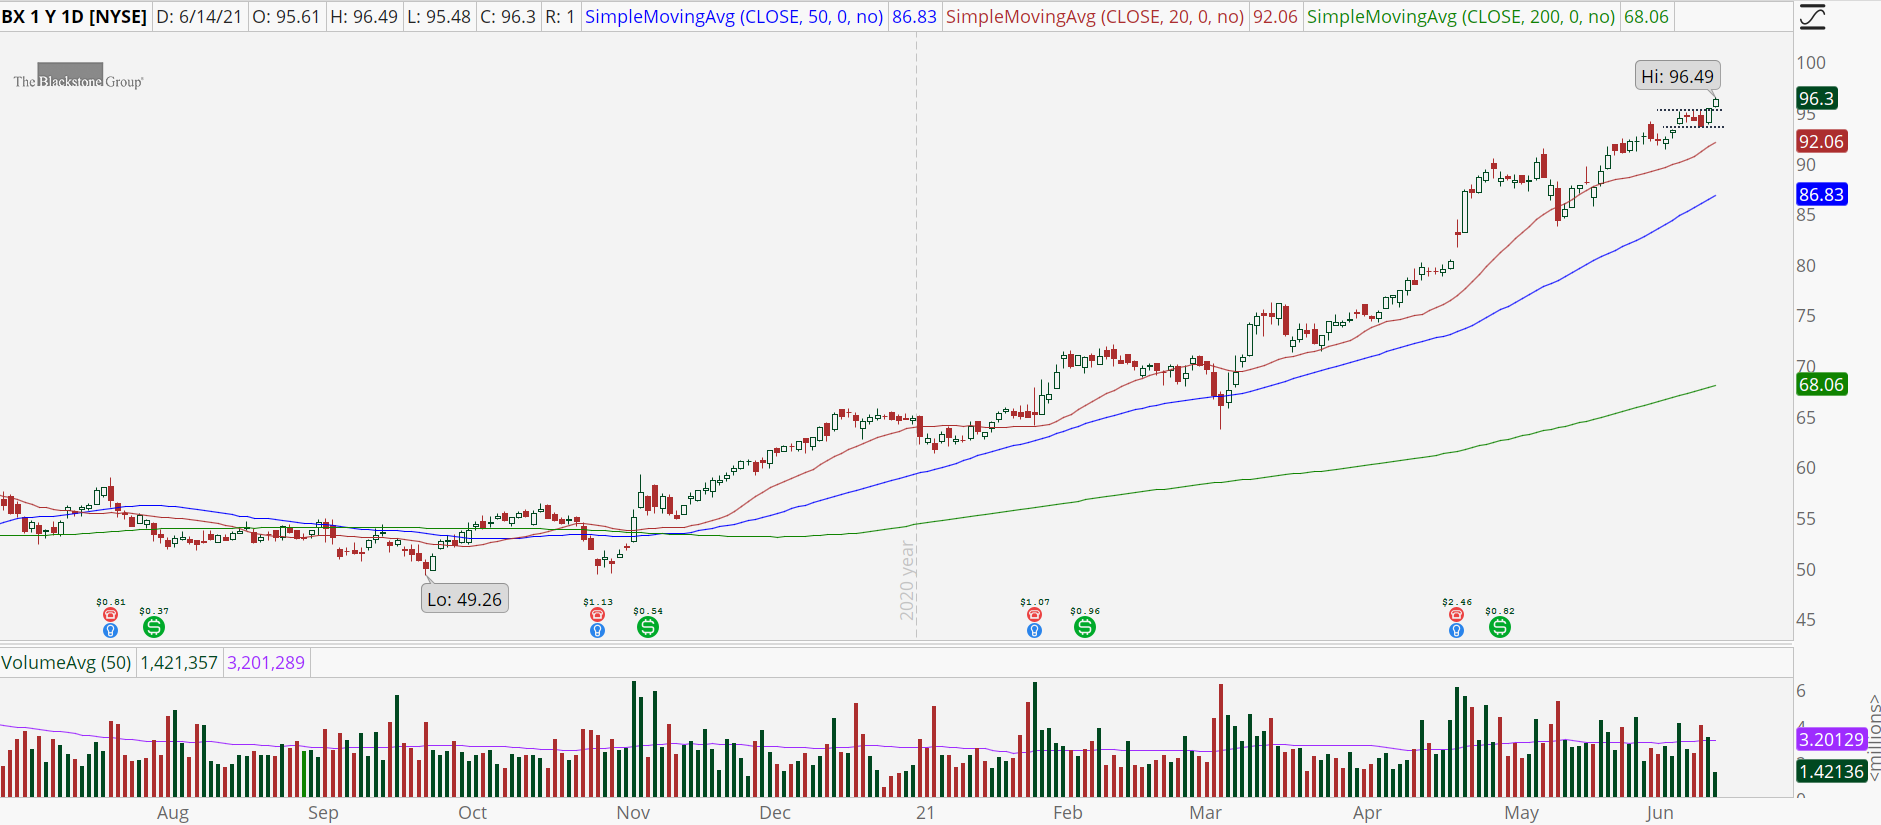 Blackstone Group (BX) stock chart with robust uptrend.